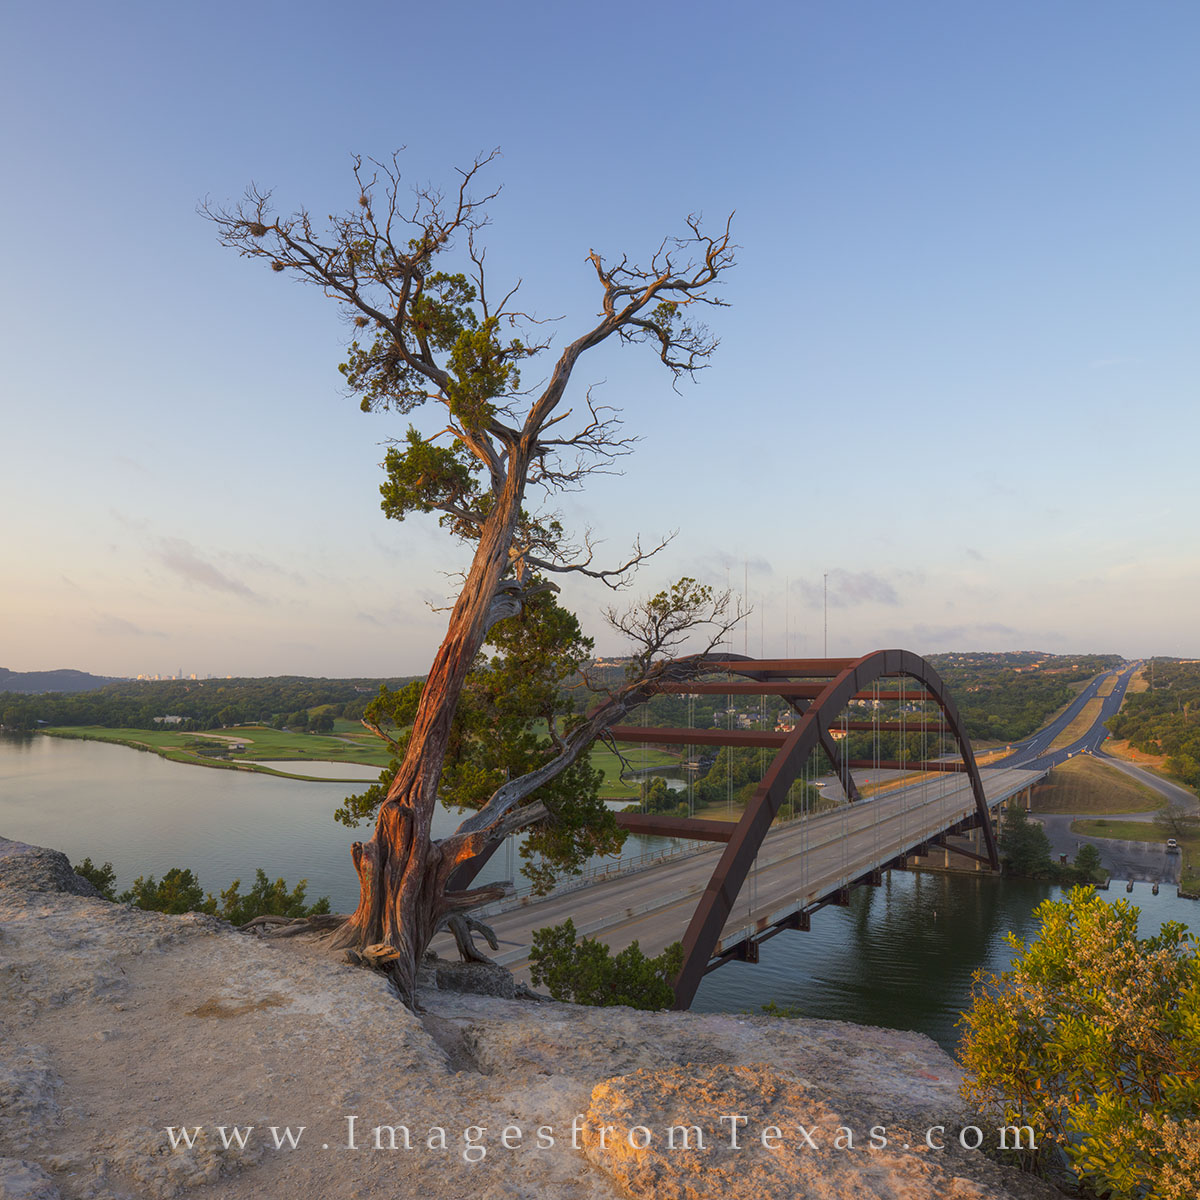 From atop the famous limestone cliffs overlooking the Colorado River, this image shows the Pennybacker Bridge, also known as...